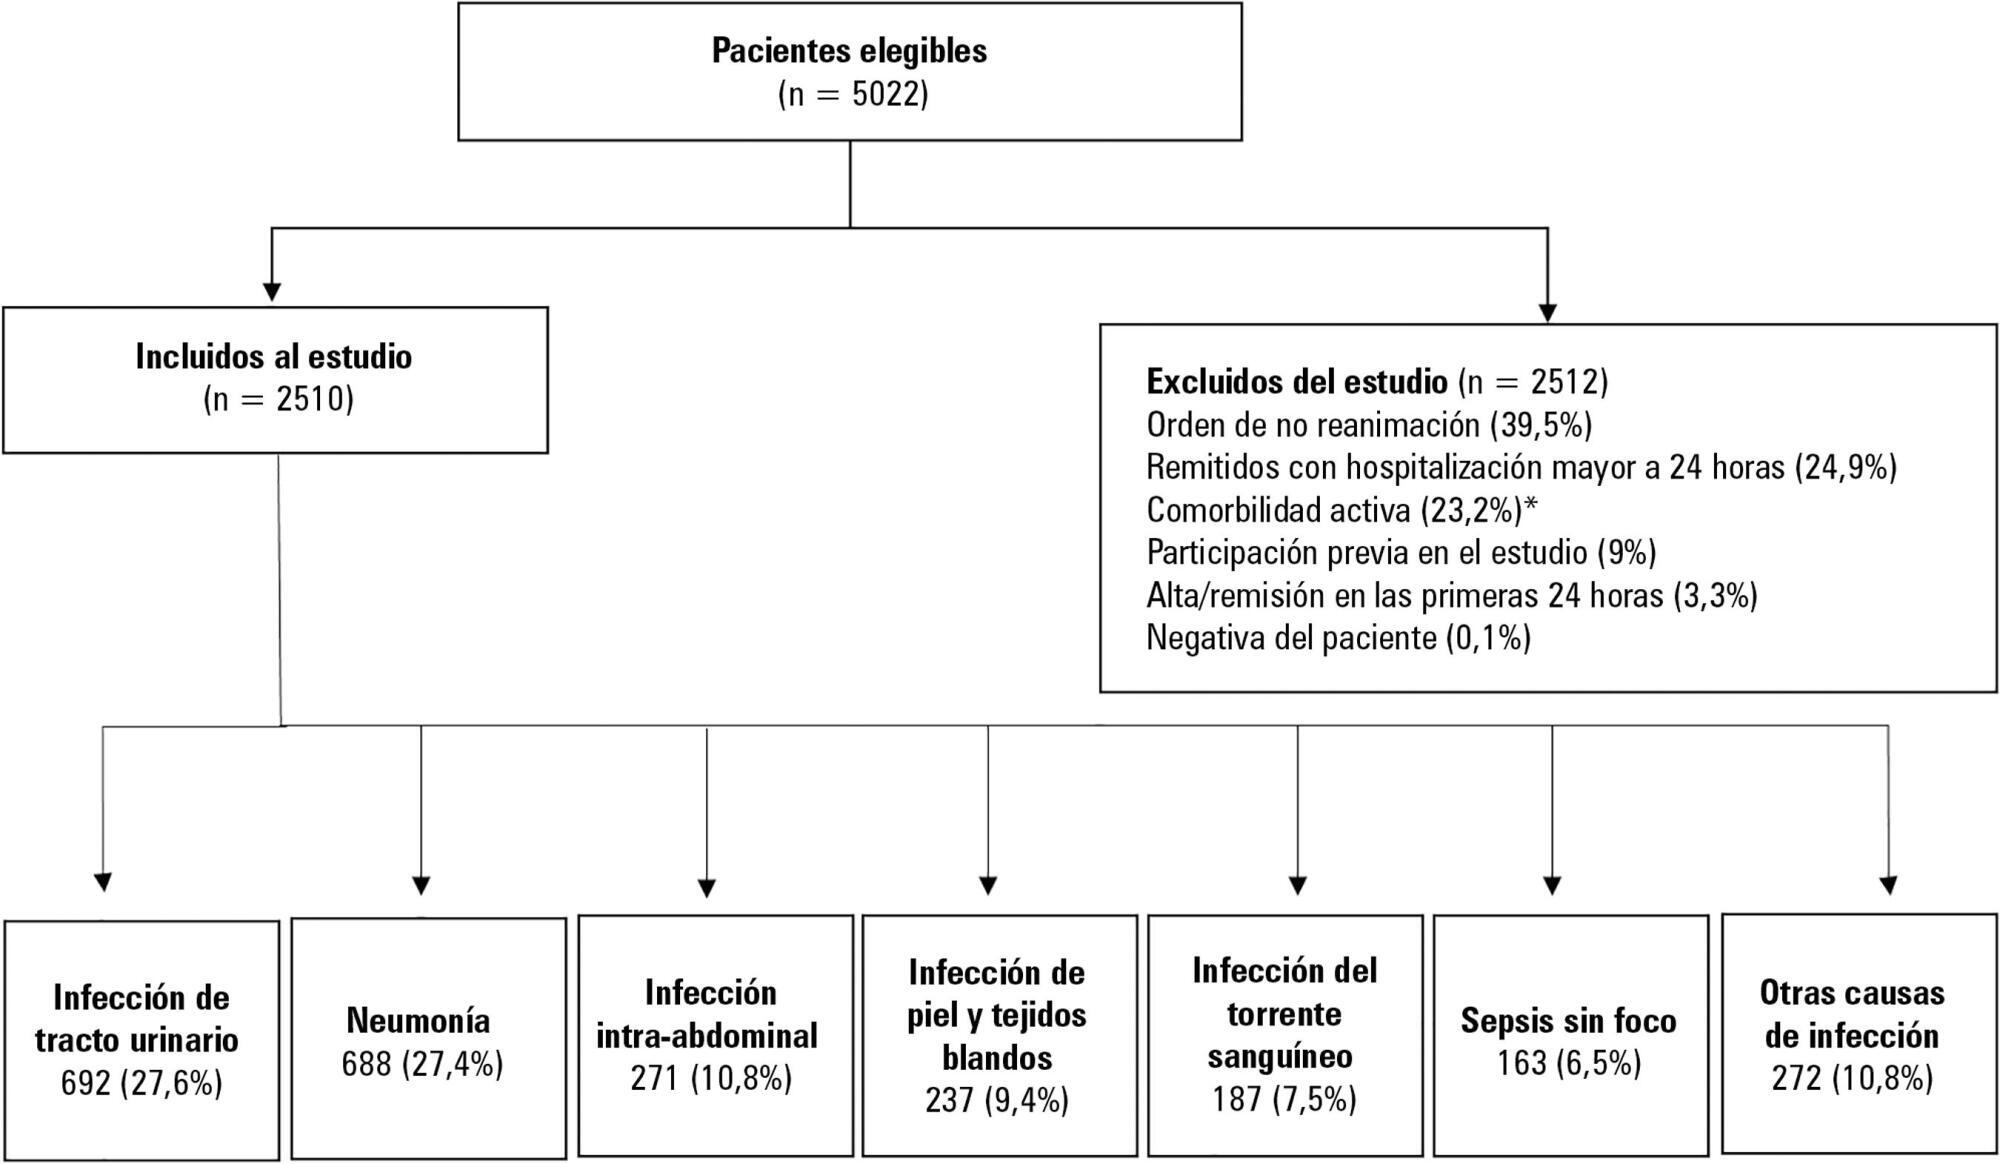 Association between site of infection and in-hospital mortality in patients with sepsis admitted to emergency departments of tertiary hospitals in Medellin, Colombia